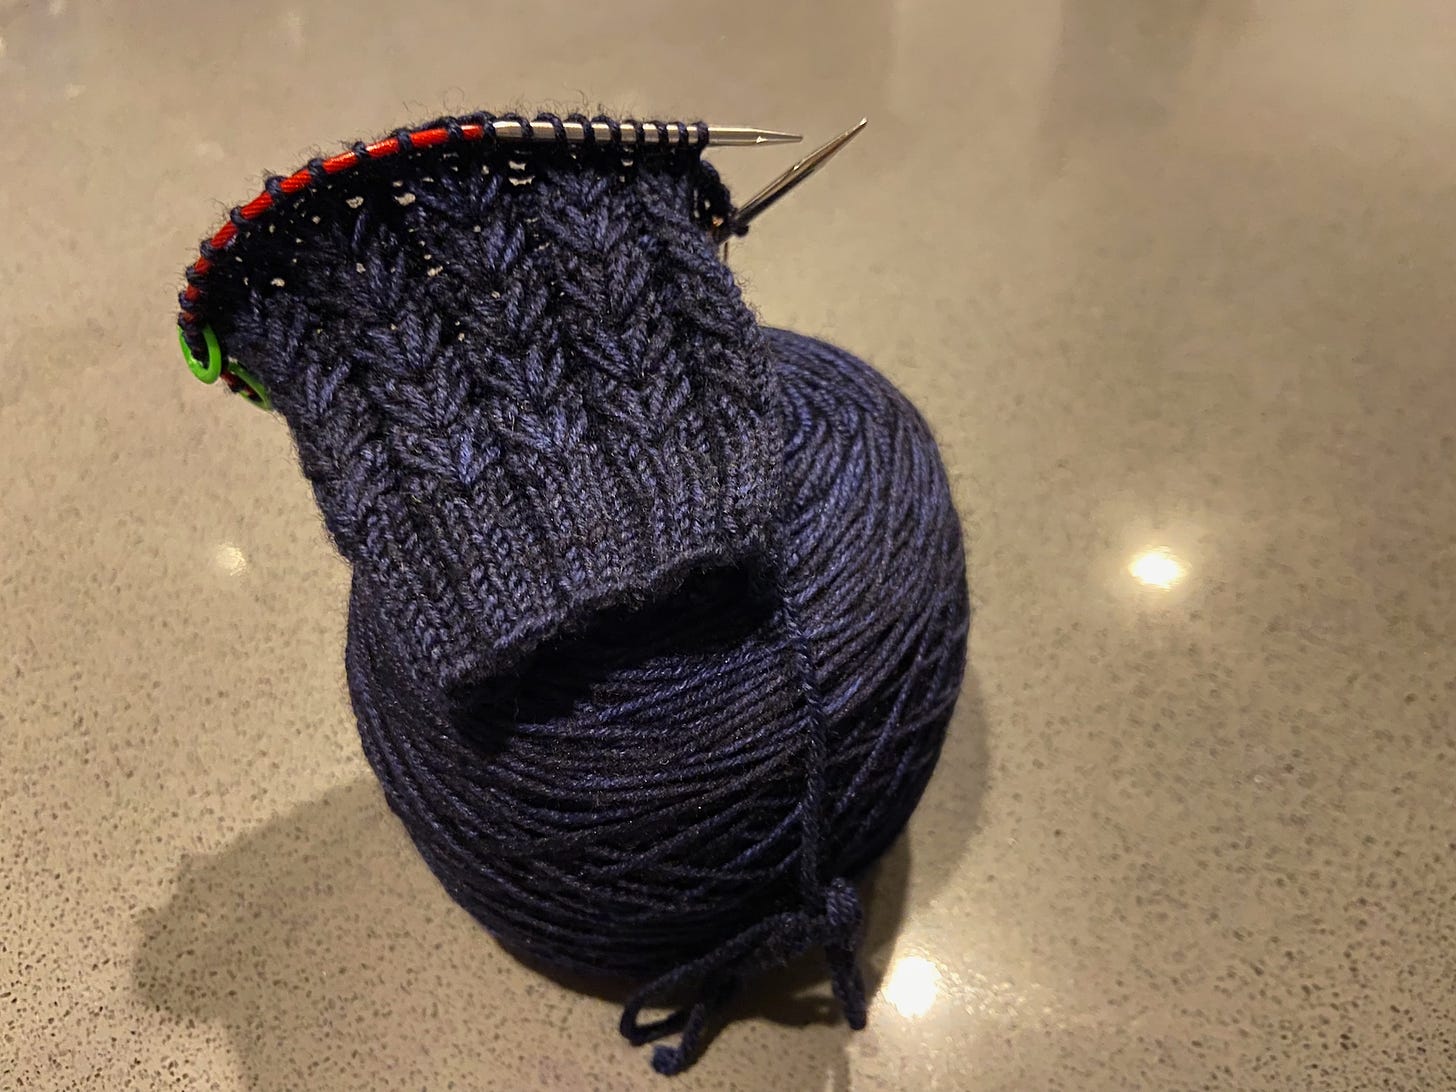 One Constellate Mitt, which is partially knitted and placed on top of a skein of yarn and is placed on a kitchen counter. The yarn is a dark blue with black coloring.